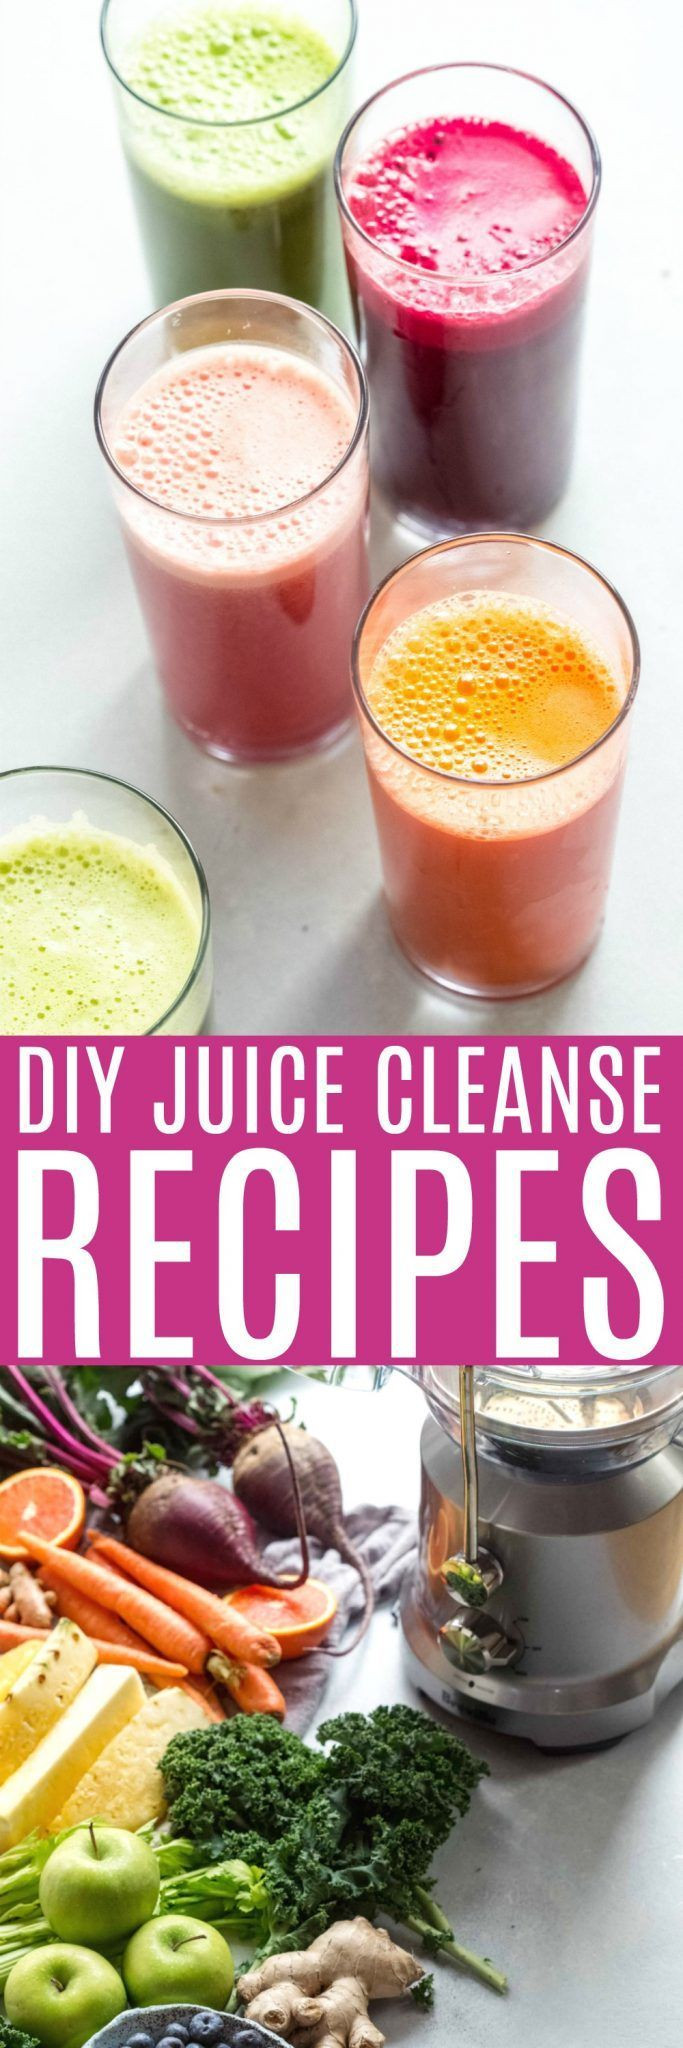 Juice Recipes For Weight Loss And Energy
 These 7 Healthy Juicing Recipes will help boost your